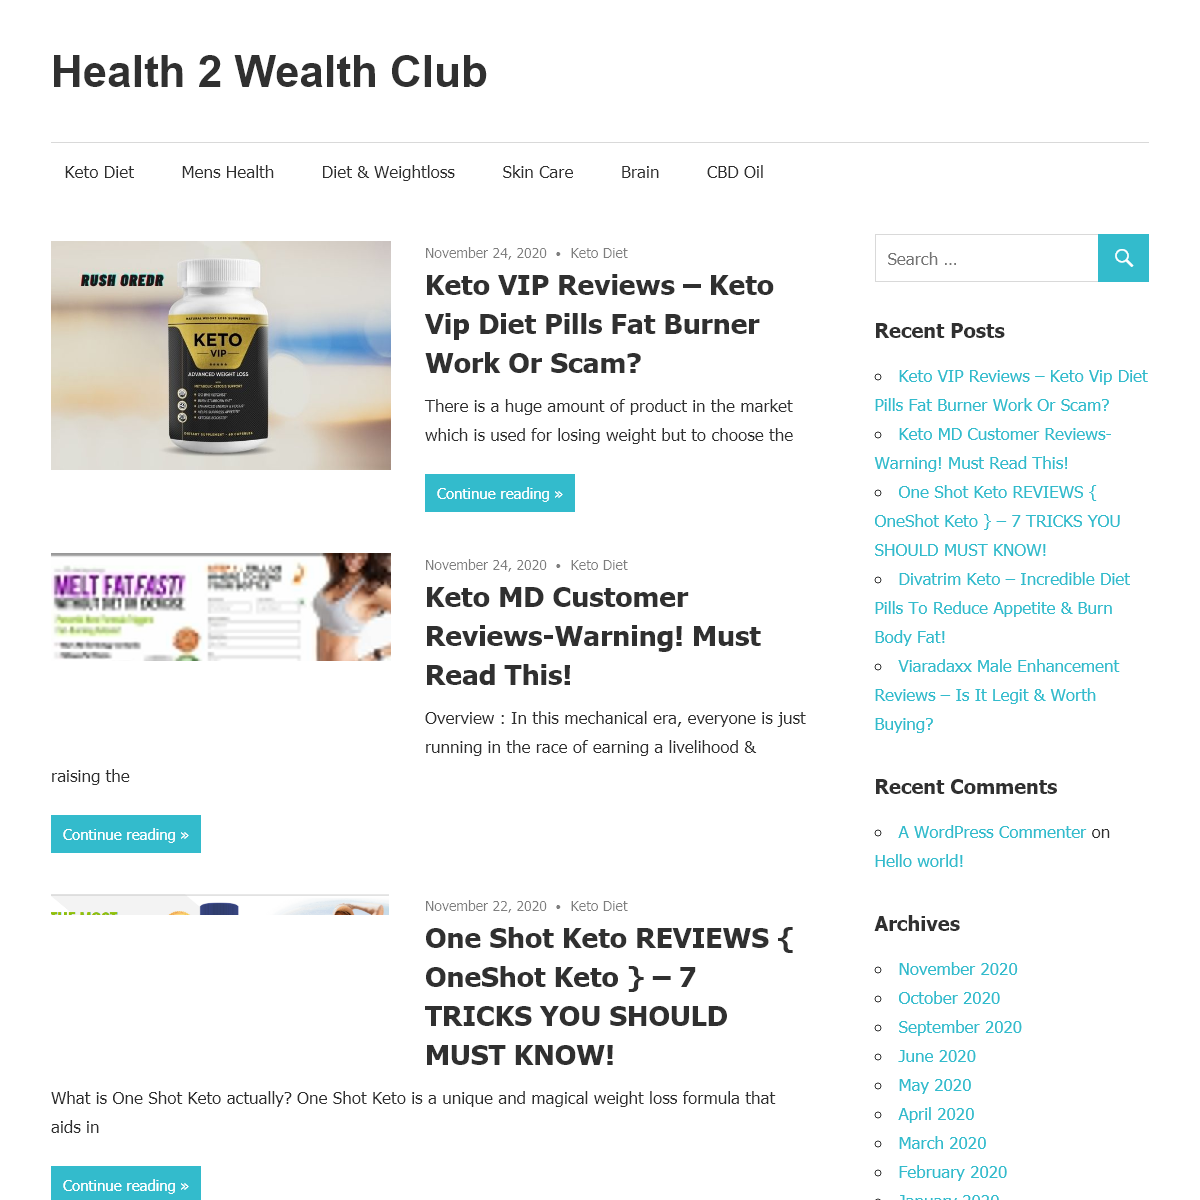 A complete backup of health2wealthclub.com